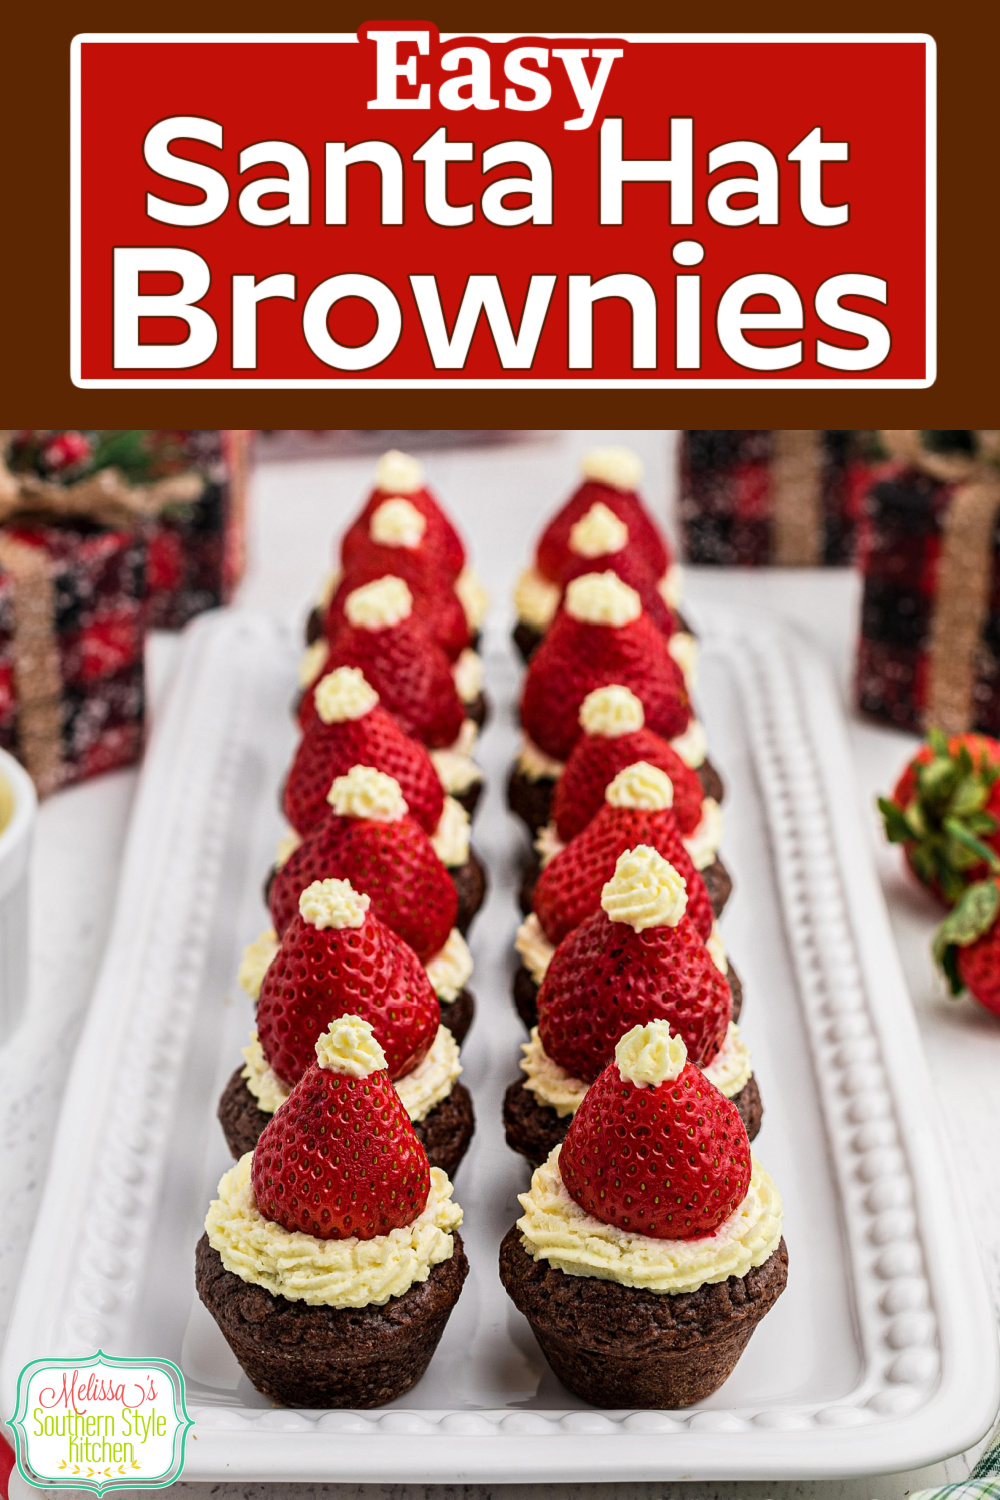 These cute as a button Santa Hat Brownies are a whimsical two bite dessert that will be the talk of your holiday goodies #santahatbrownies #santa #santahats #browniebites #brownies #christmasdesserts #christmasrecipes #strawberries via @melissasssk